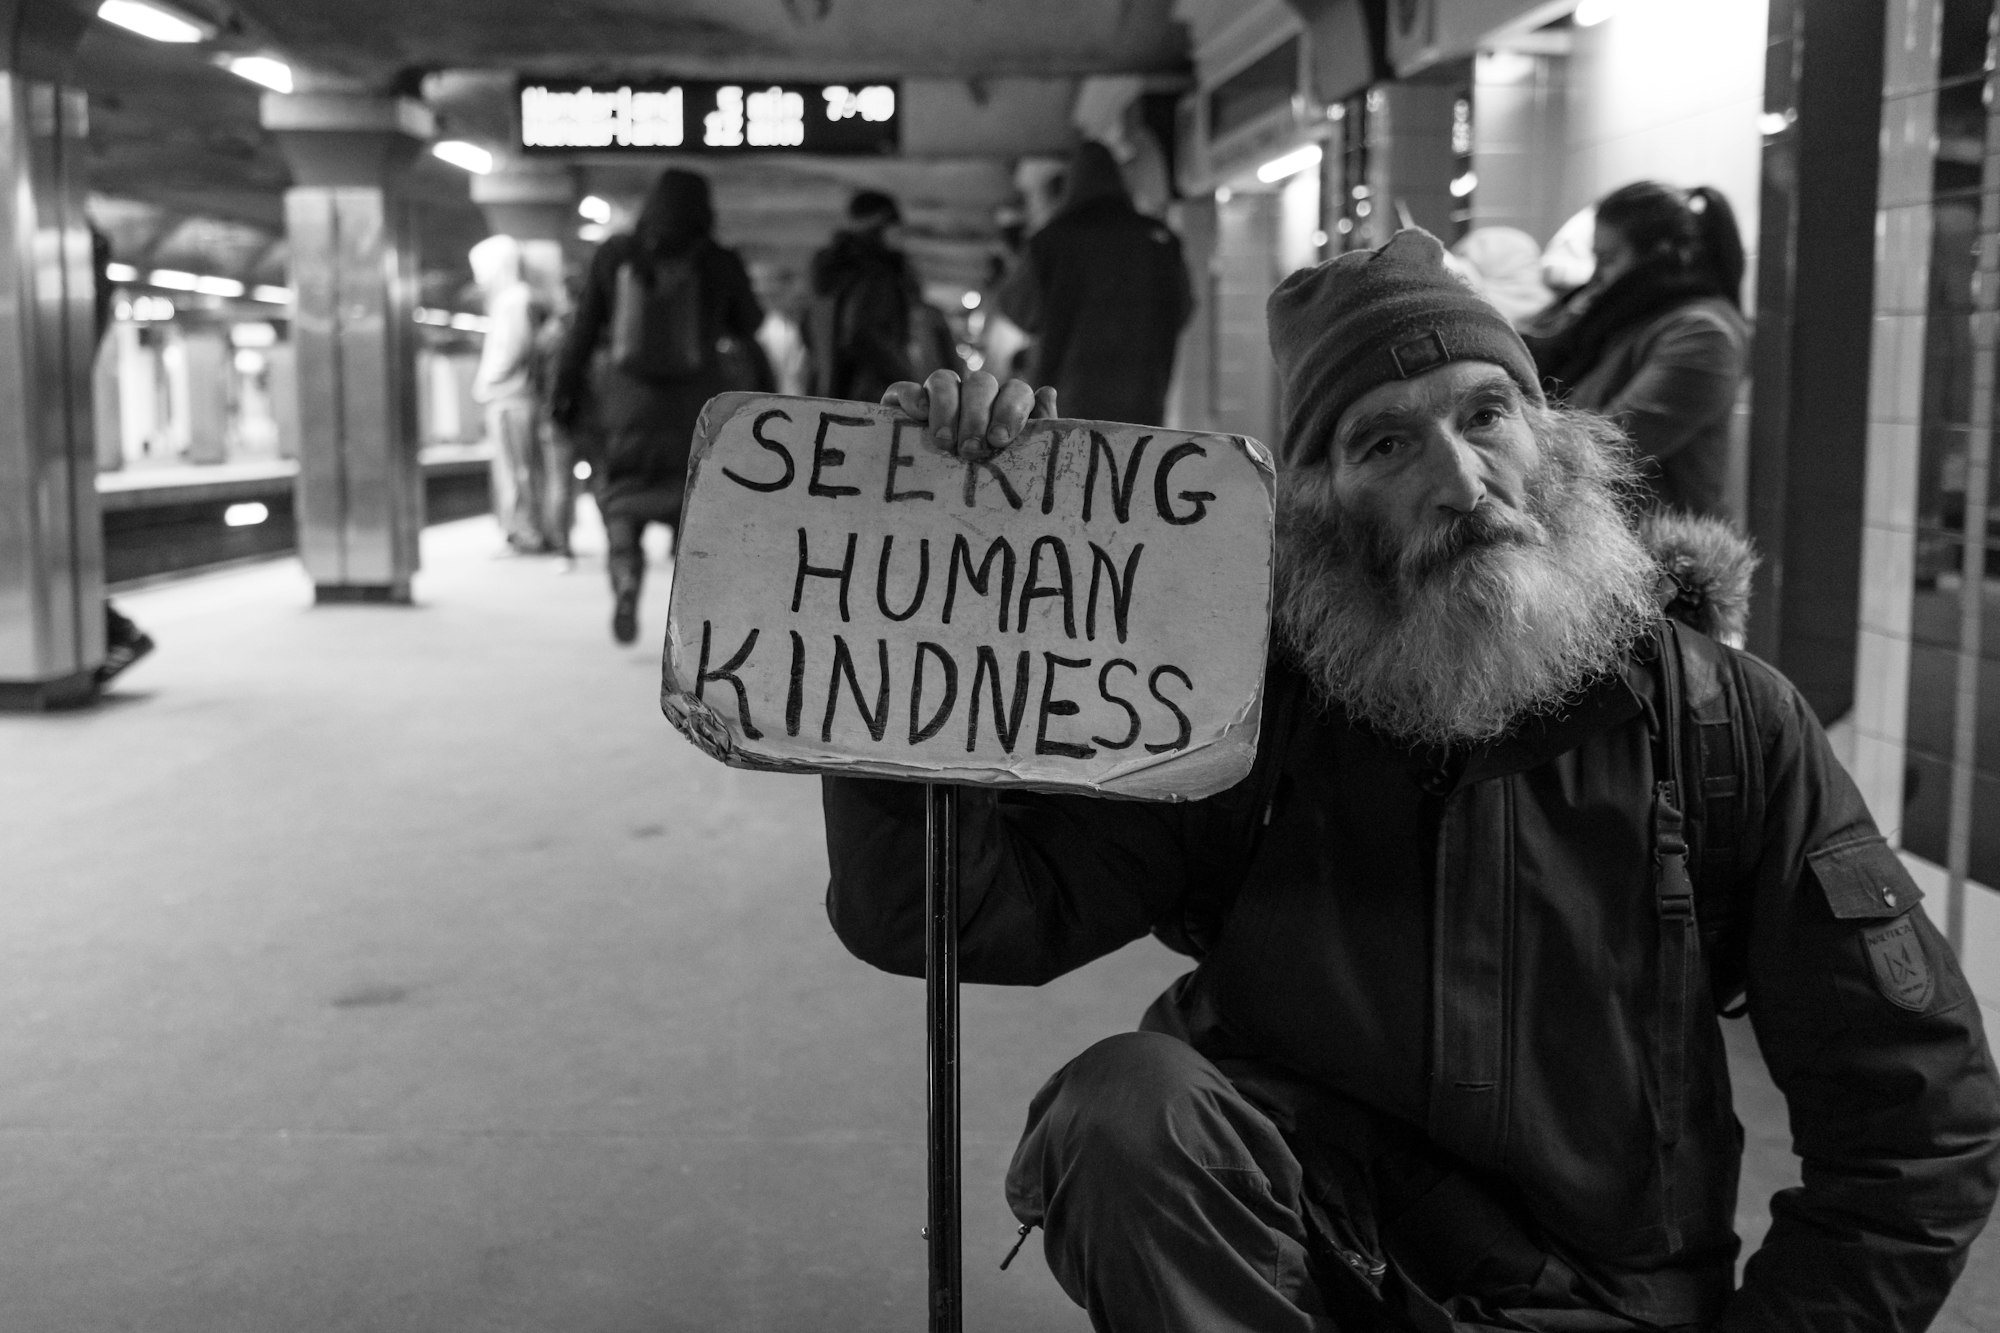 I met Michael in a Boston subway station. I told him I liked his sign. “What matters is what it means to you,” he told me. I asked what it meant to him. “Doing a deed or expressing kindness to another person without expecting anything in return,” Michael said. I love approaching strangers wherever I go. Listening and talking to them teaches you about people and how similar we all are to one another. Just like Michael, we’re all seeking human kindness.